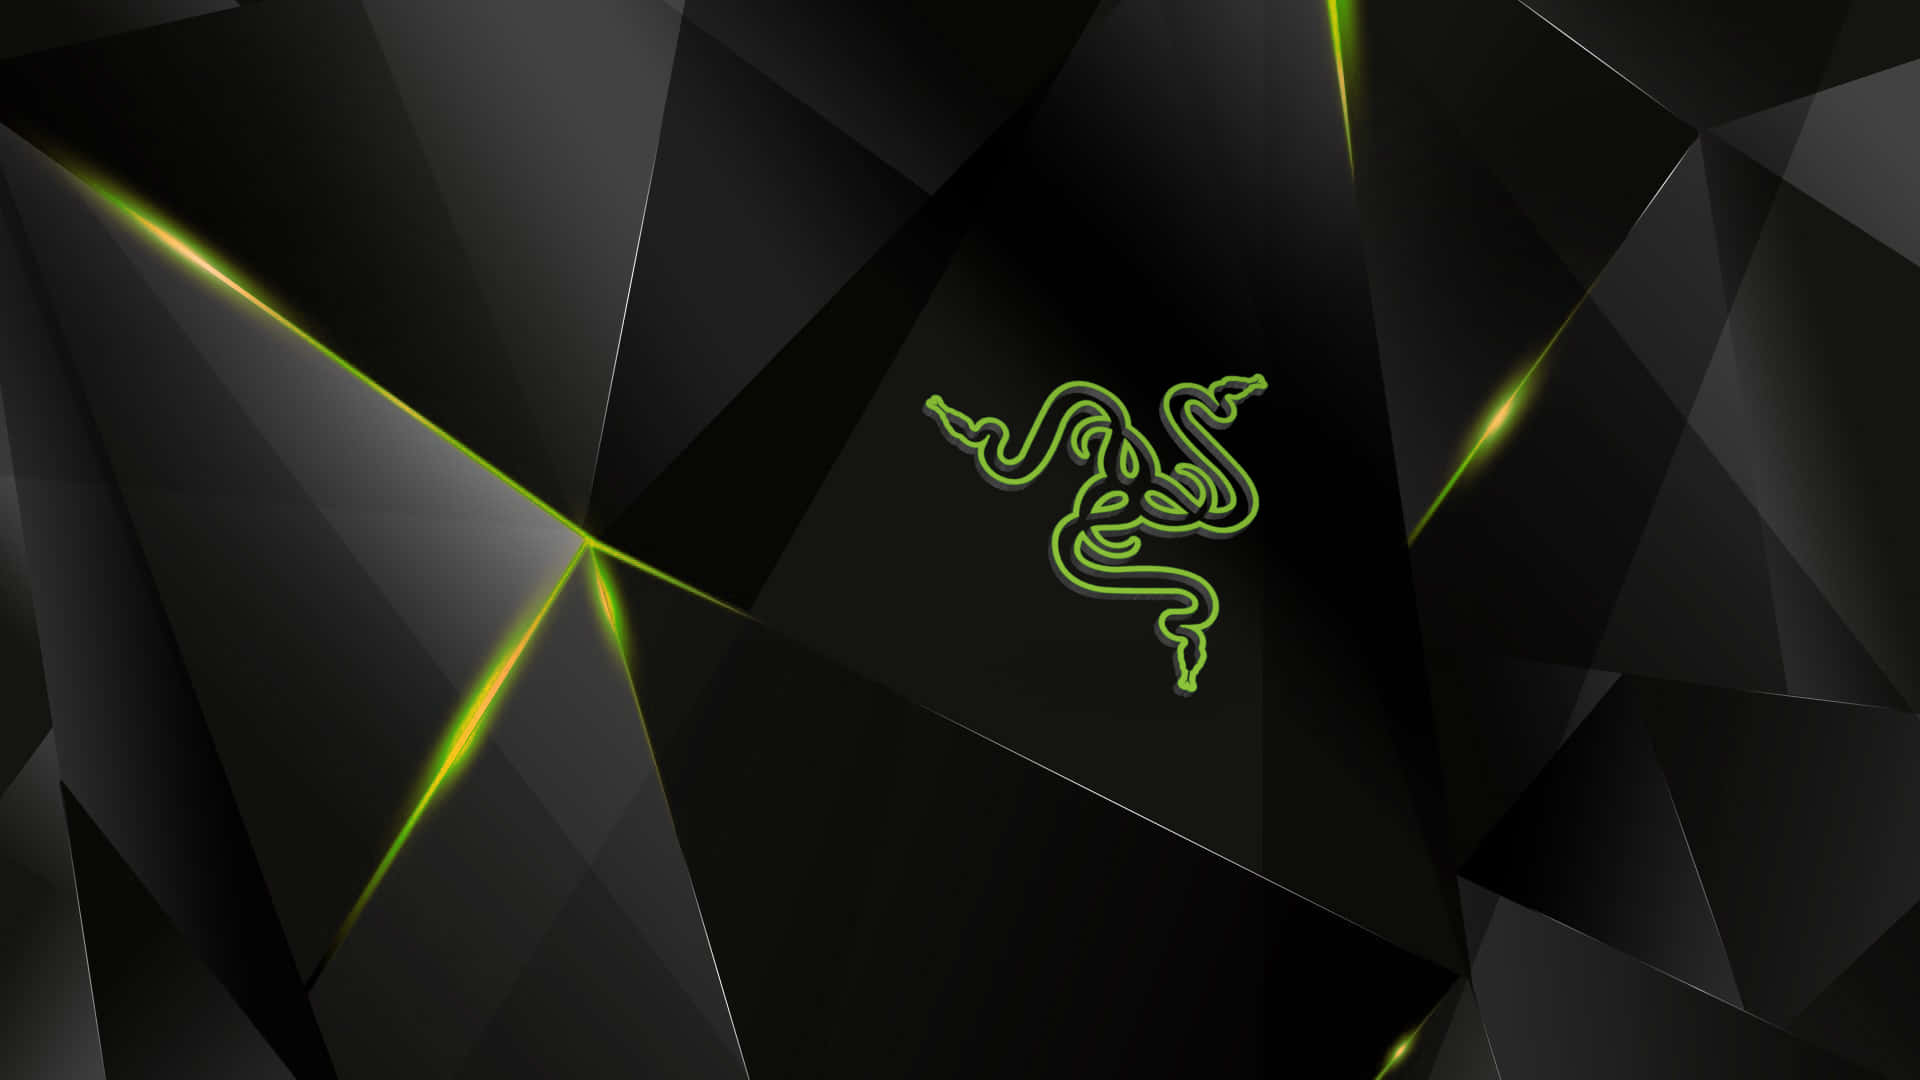 Razer Animated Wallpapers - Wallpaper Cave